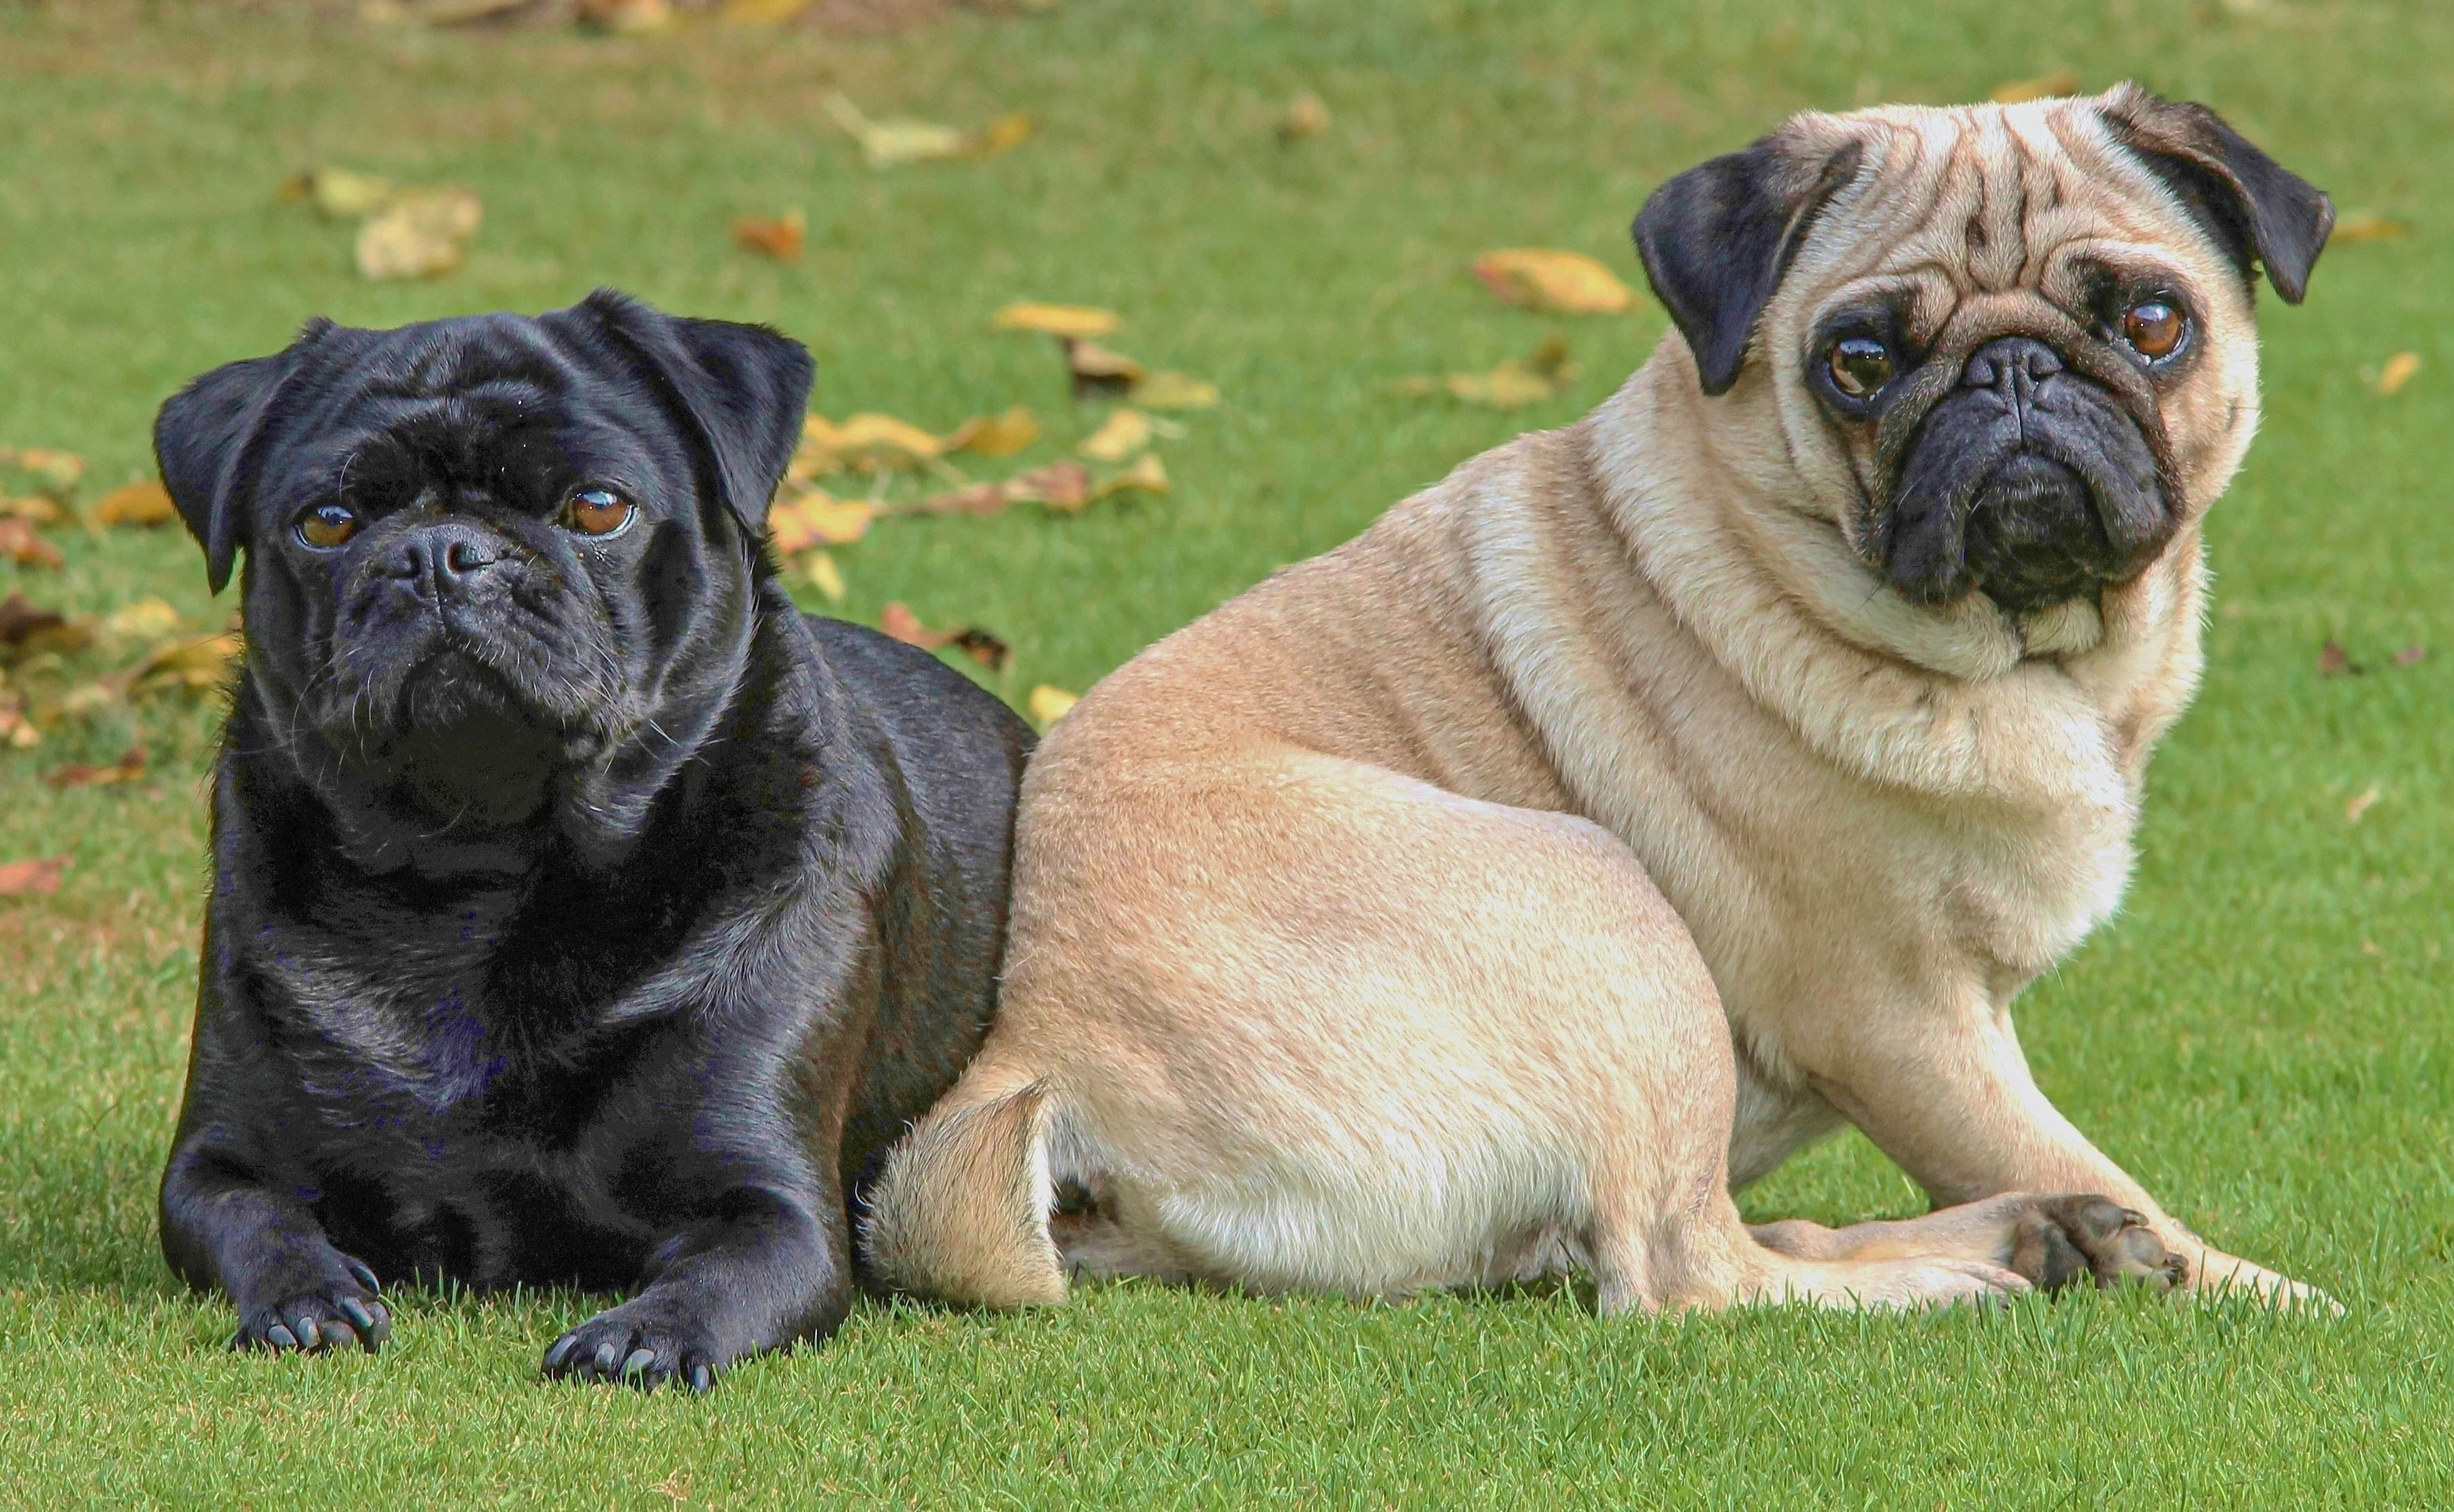 Black pug and fawn pug with black mask sitting outside.